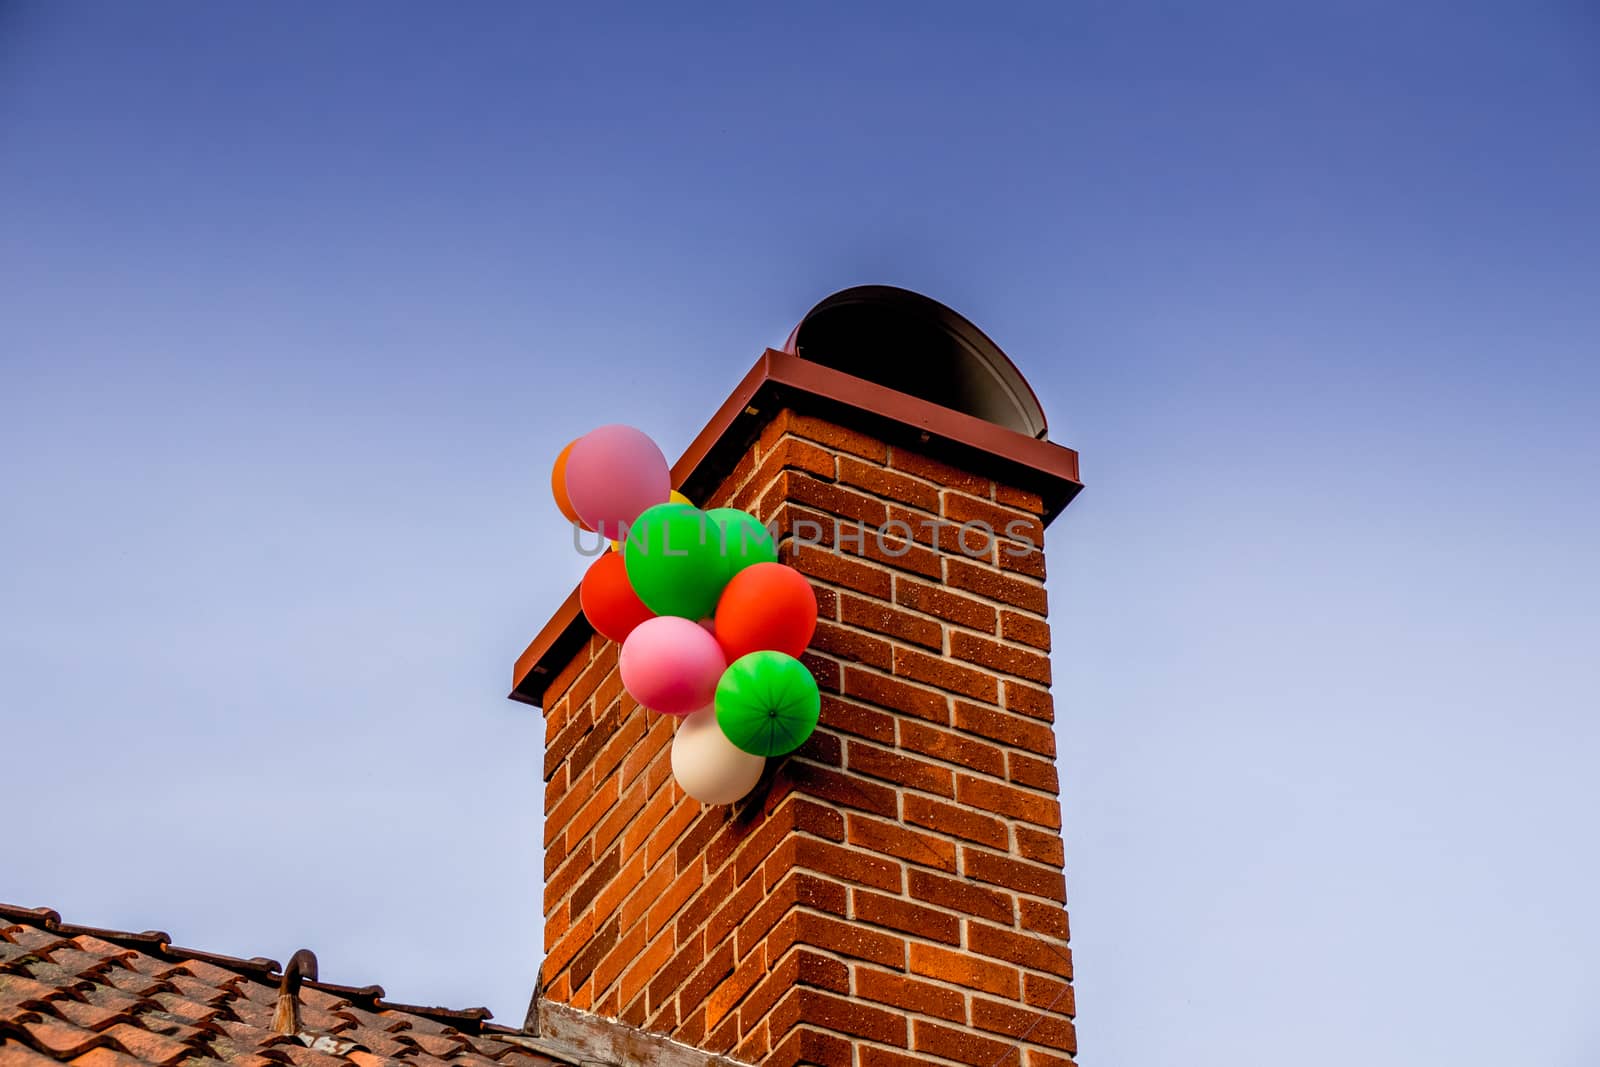 Ballons on a chimney by thomas_males